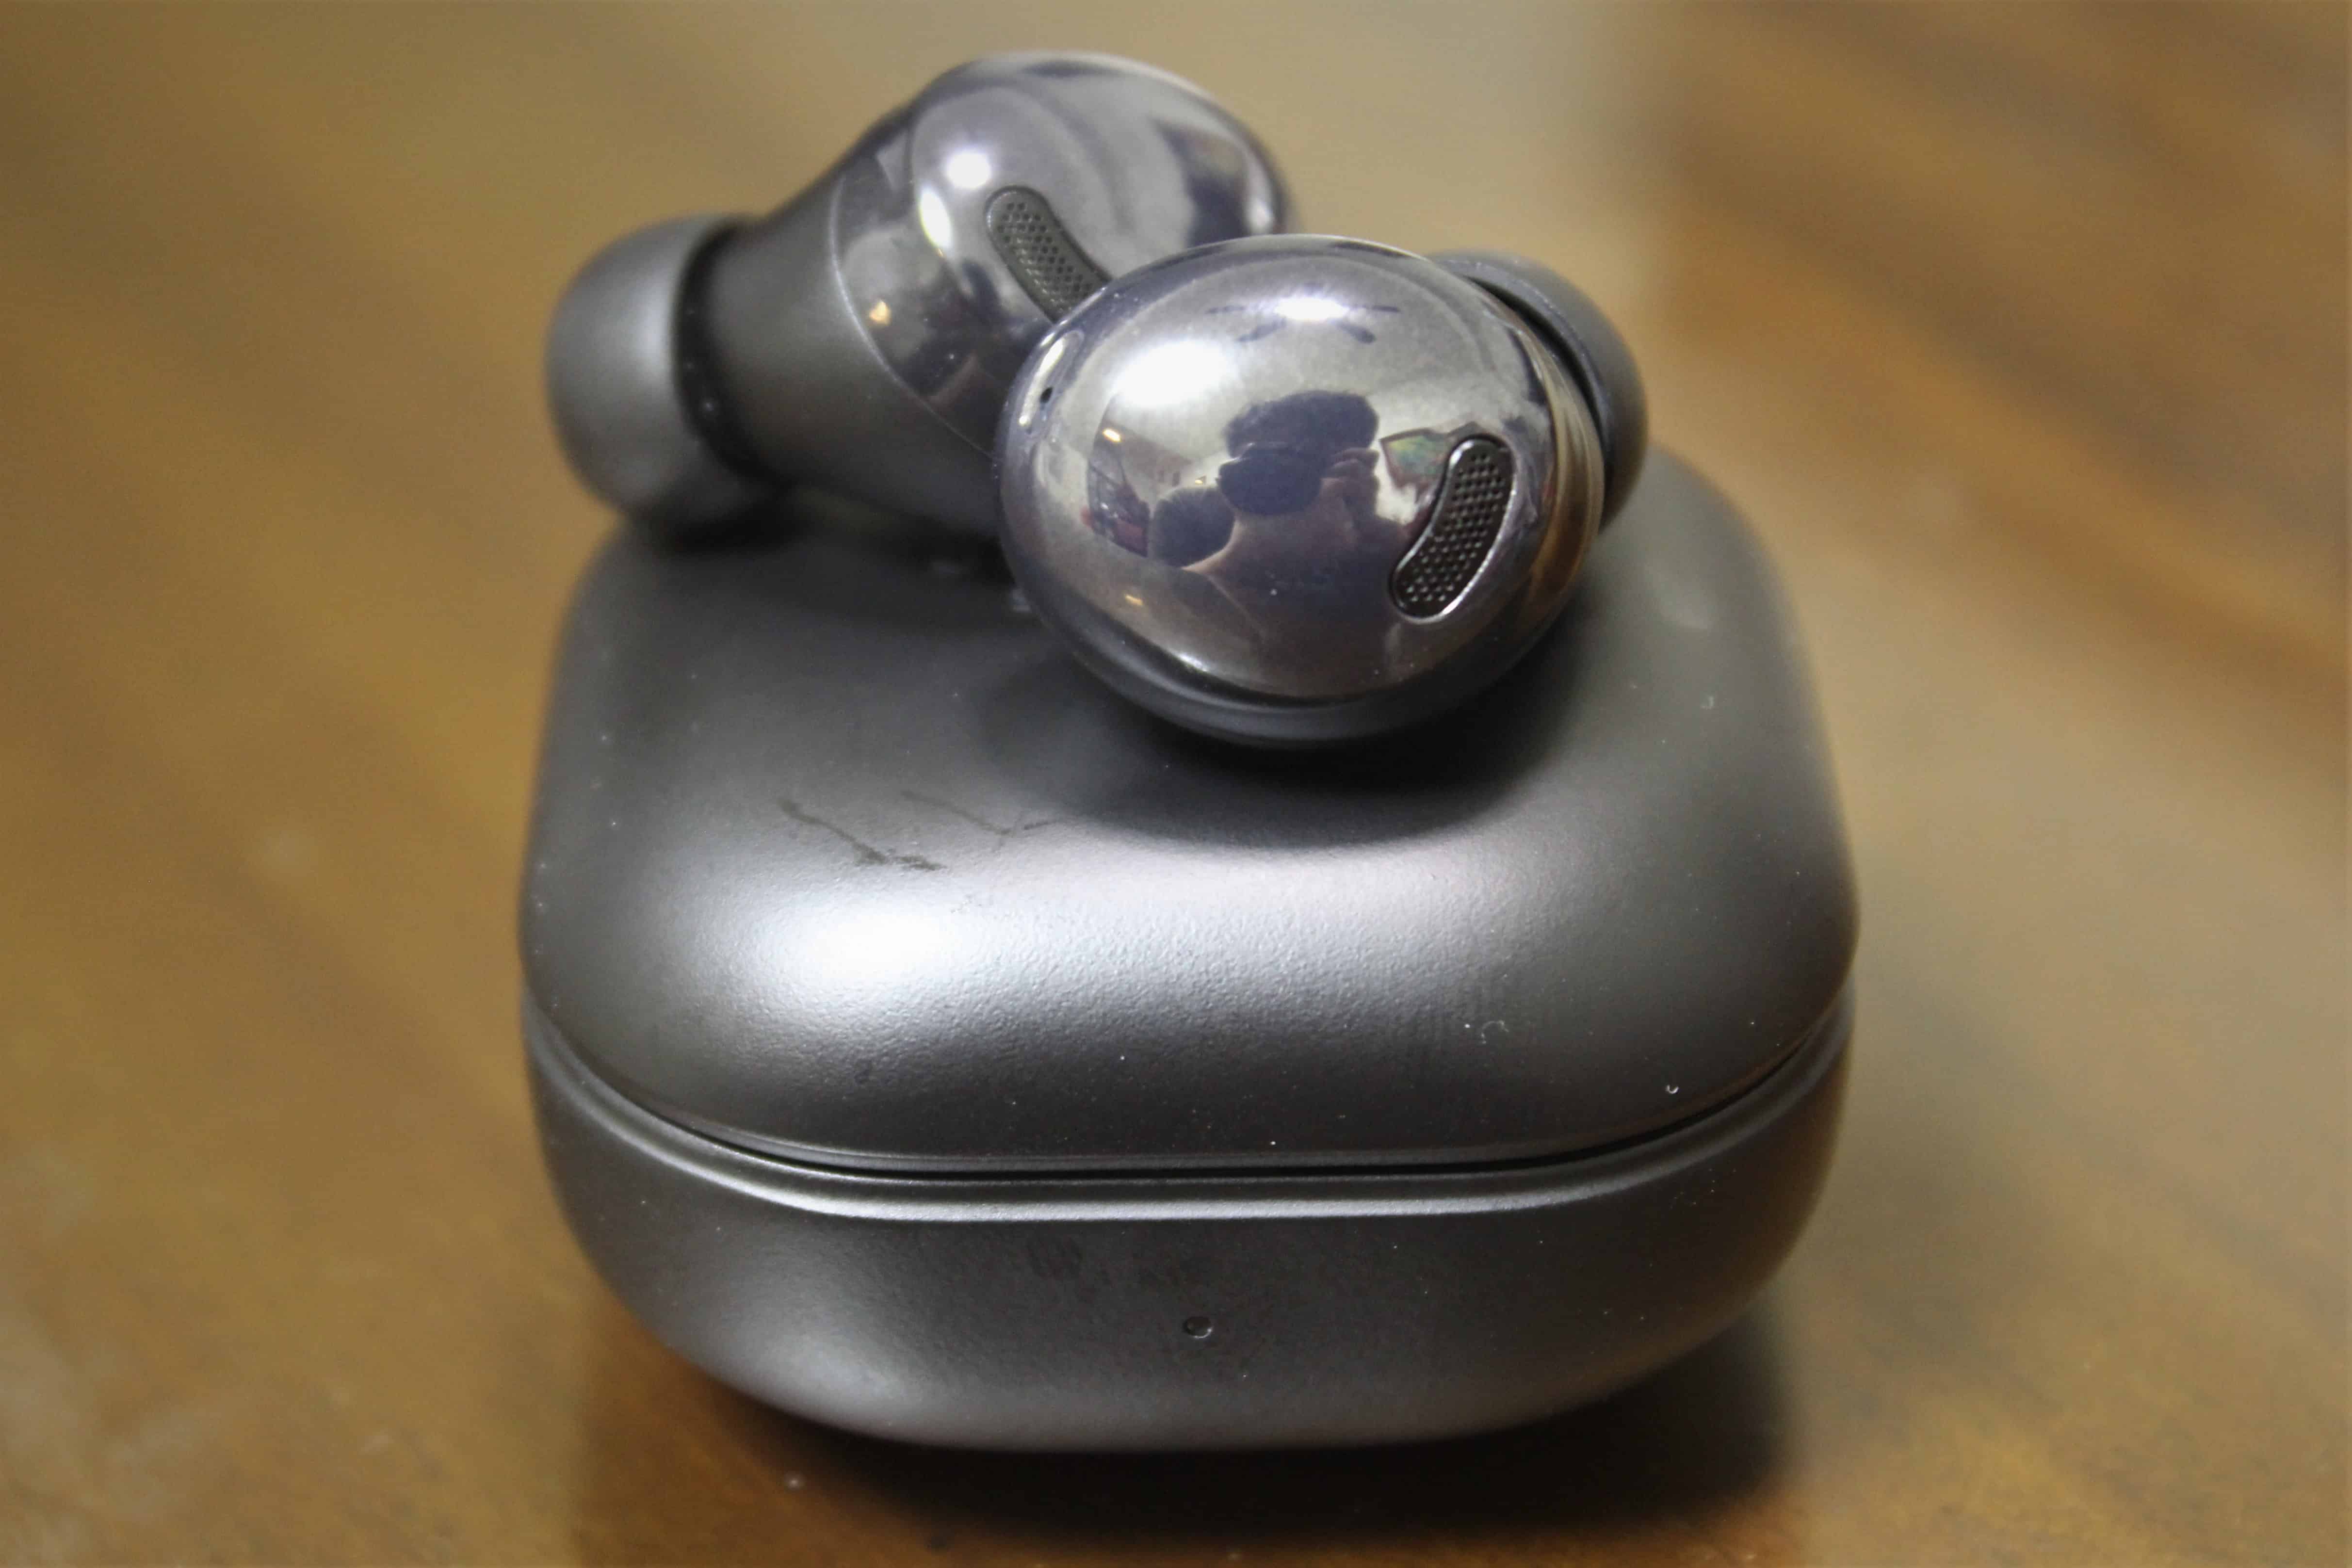 Samsung Galaxy buds pro review: Noise-cancelling earphones to